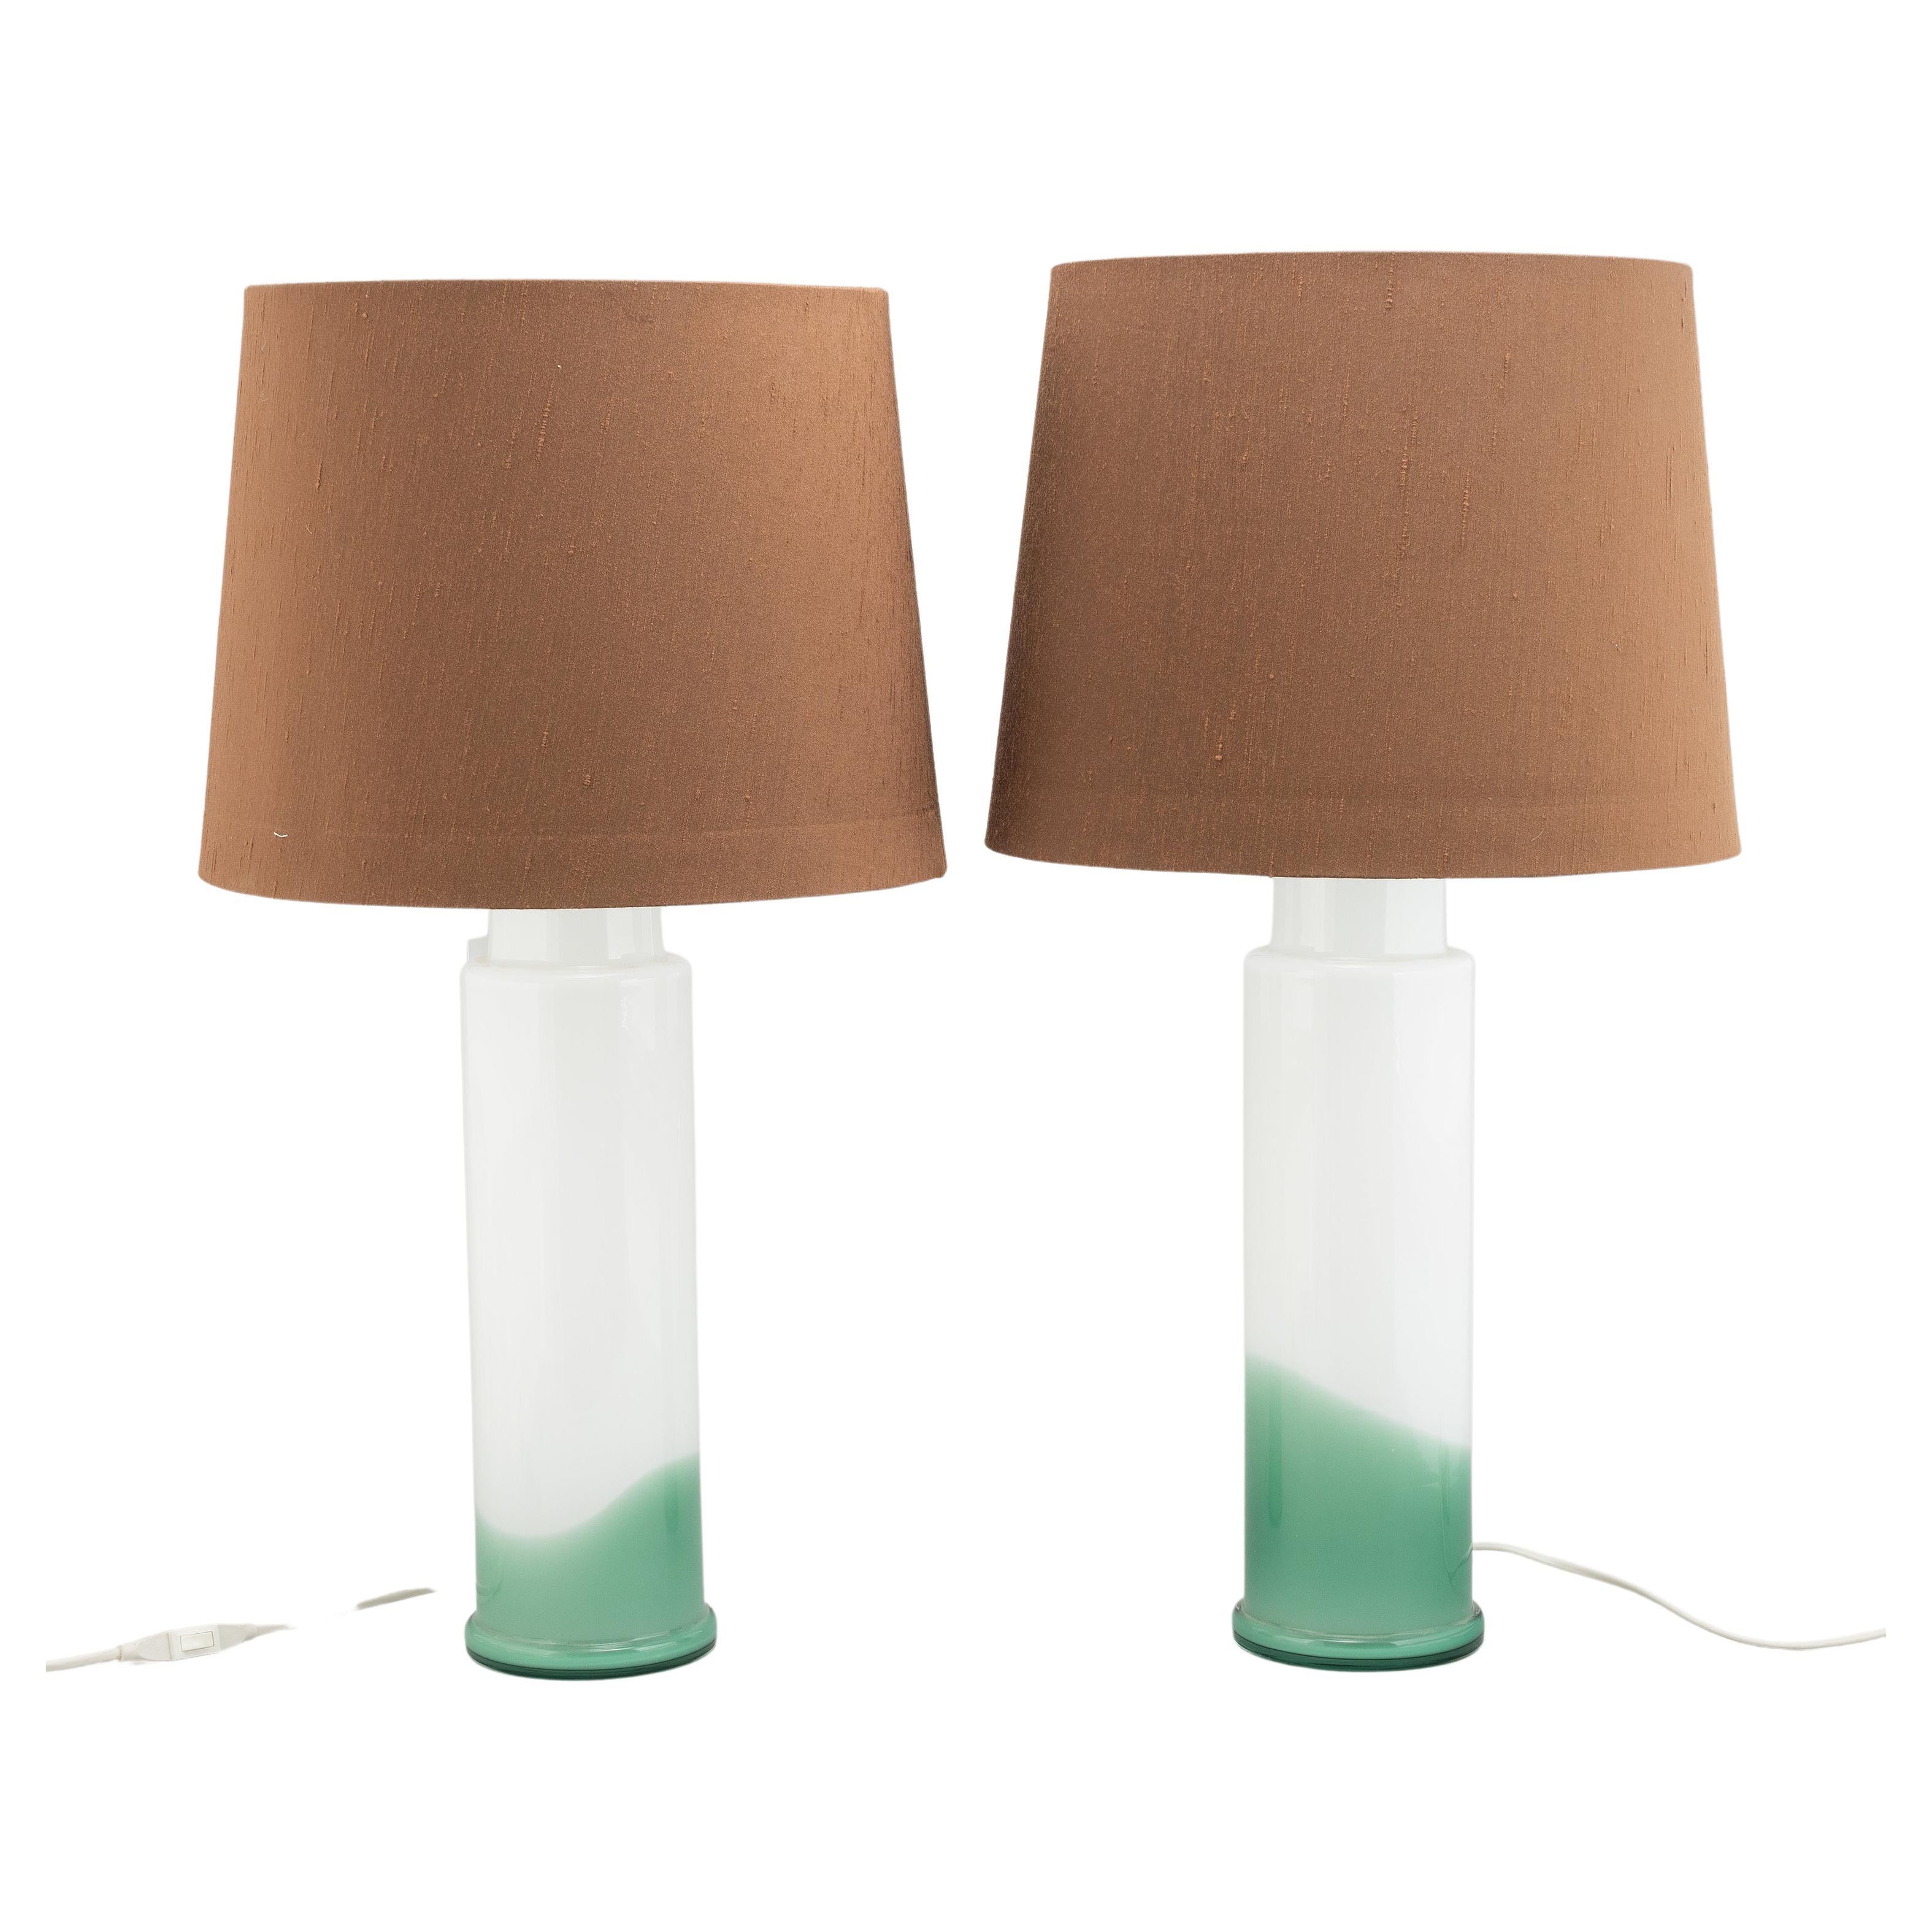 Pair of Glass Table Lamps by Luxus, Vittsjö Sweden 1970 Marked